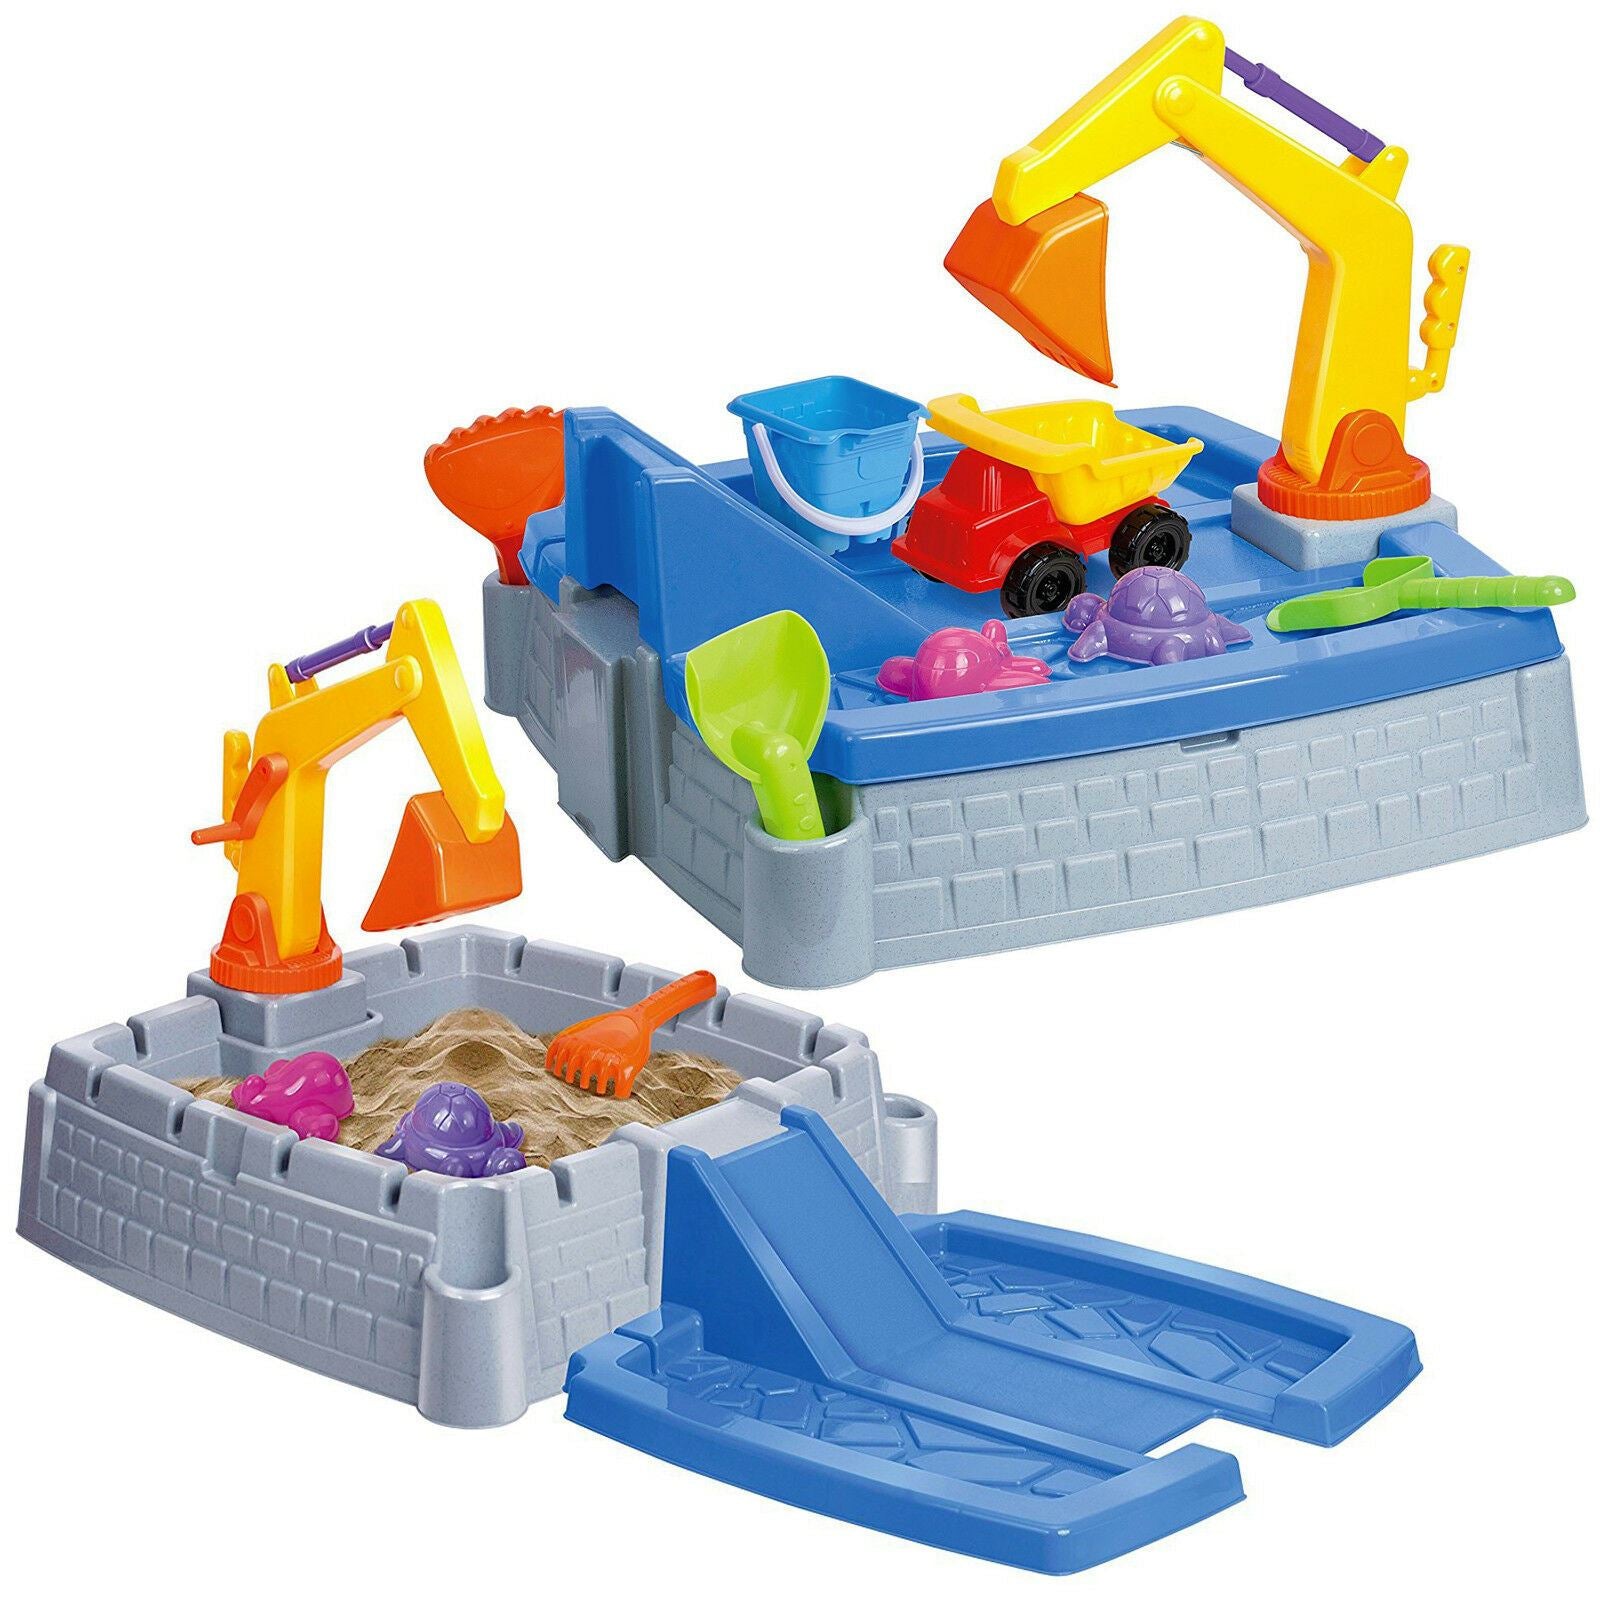 2 in 1 Kids Sand Box Water Table by The Magic Toy Shop - UKBuyZone